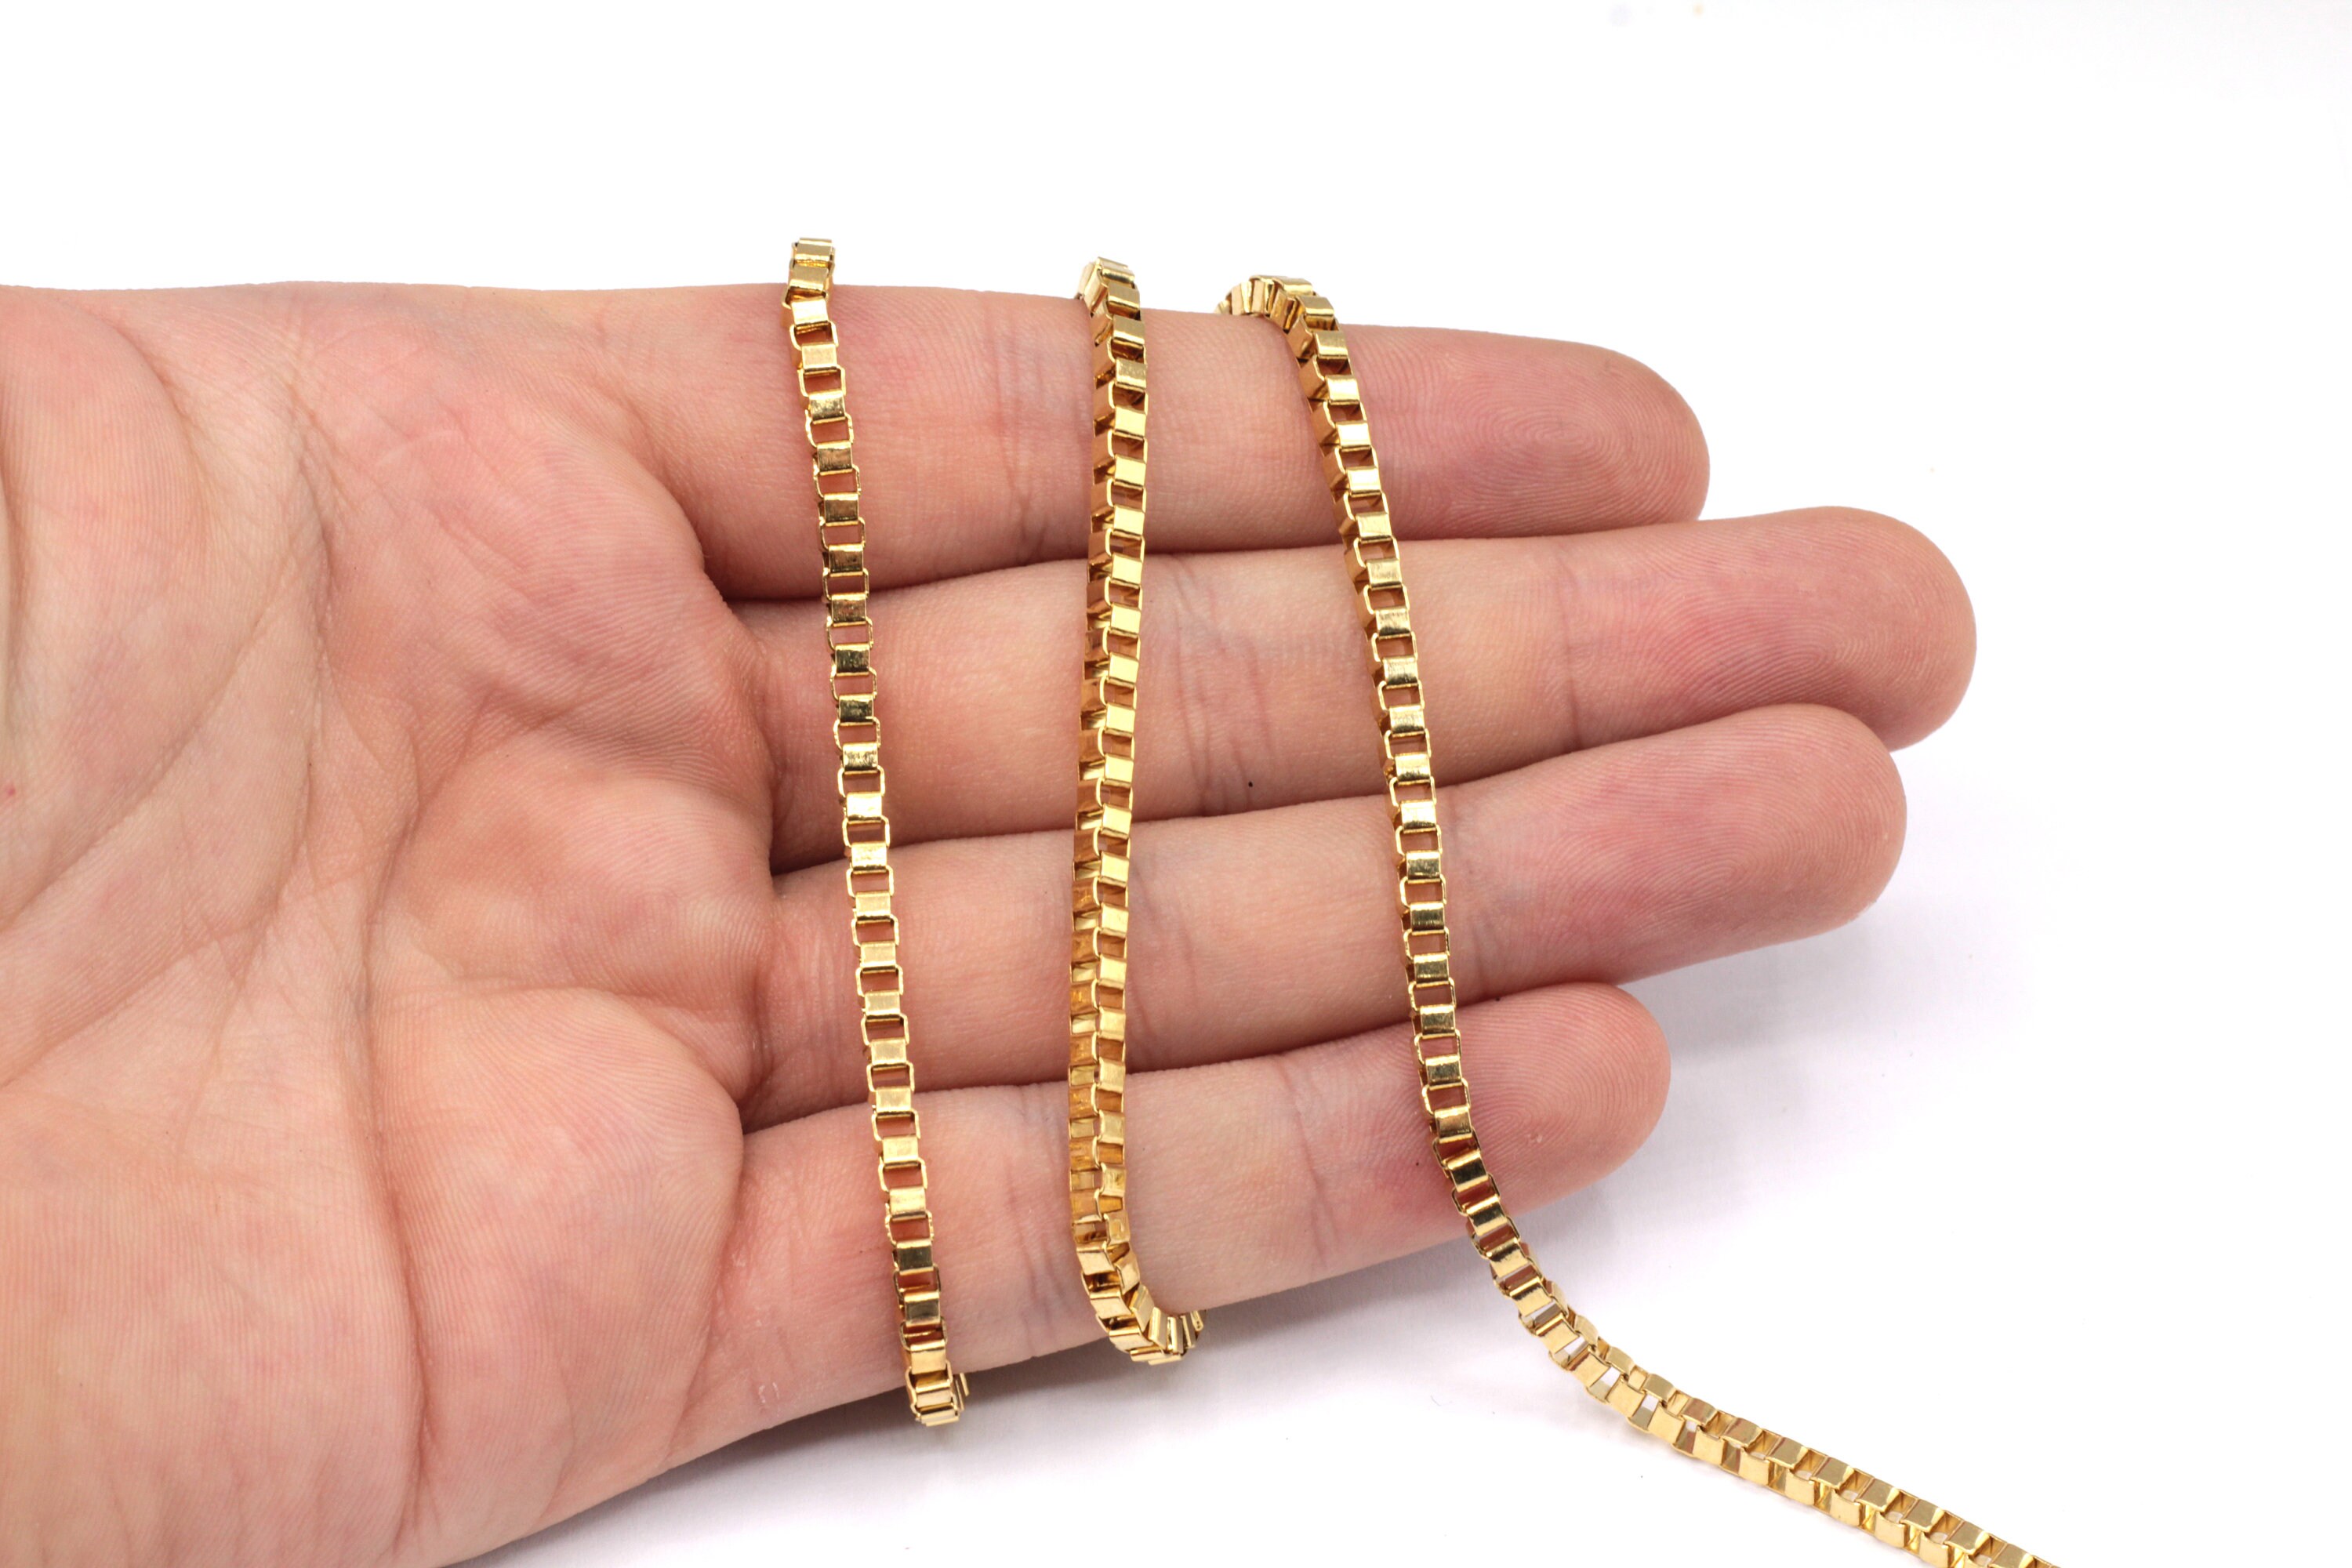 Gold Plated Brass Chain Link Size 2.5x5.2mm Quality Craft 